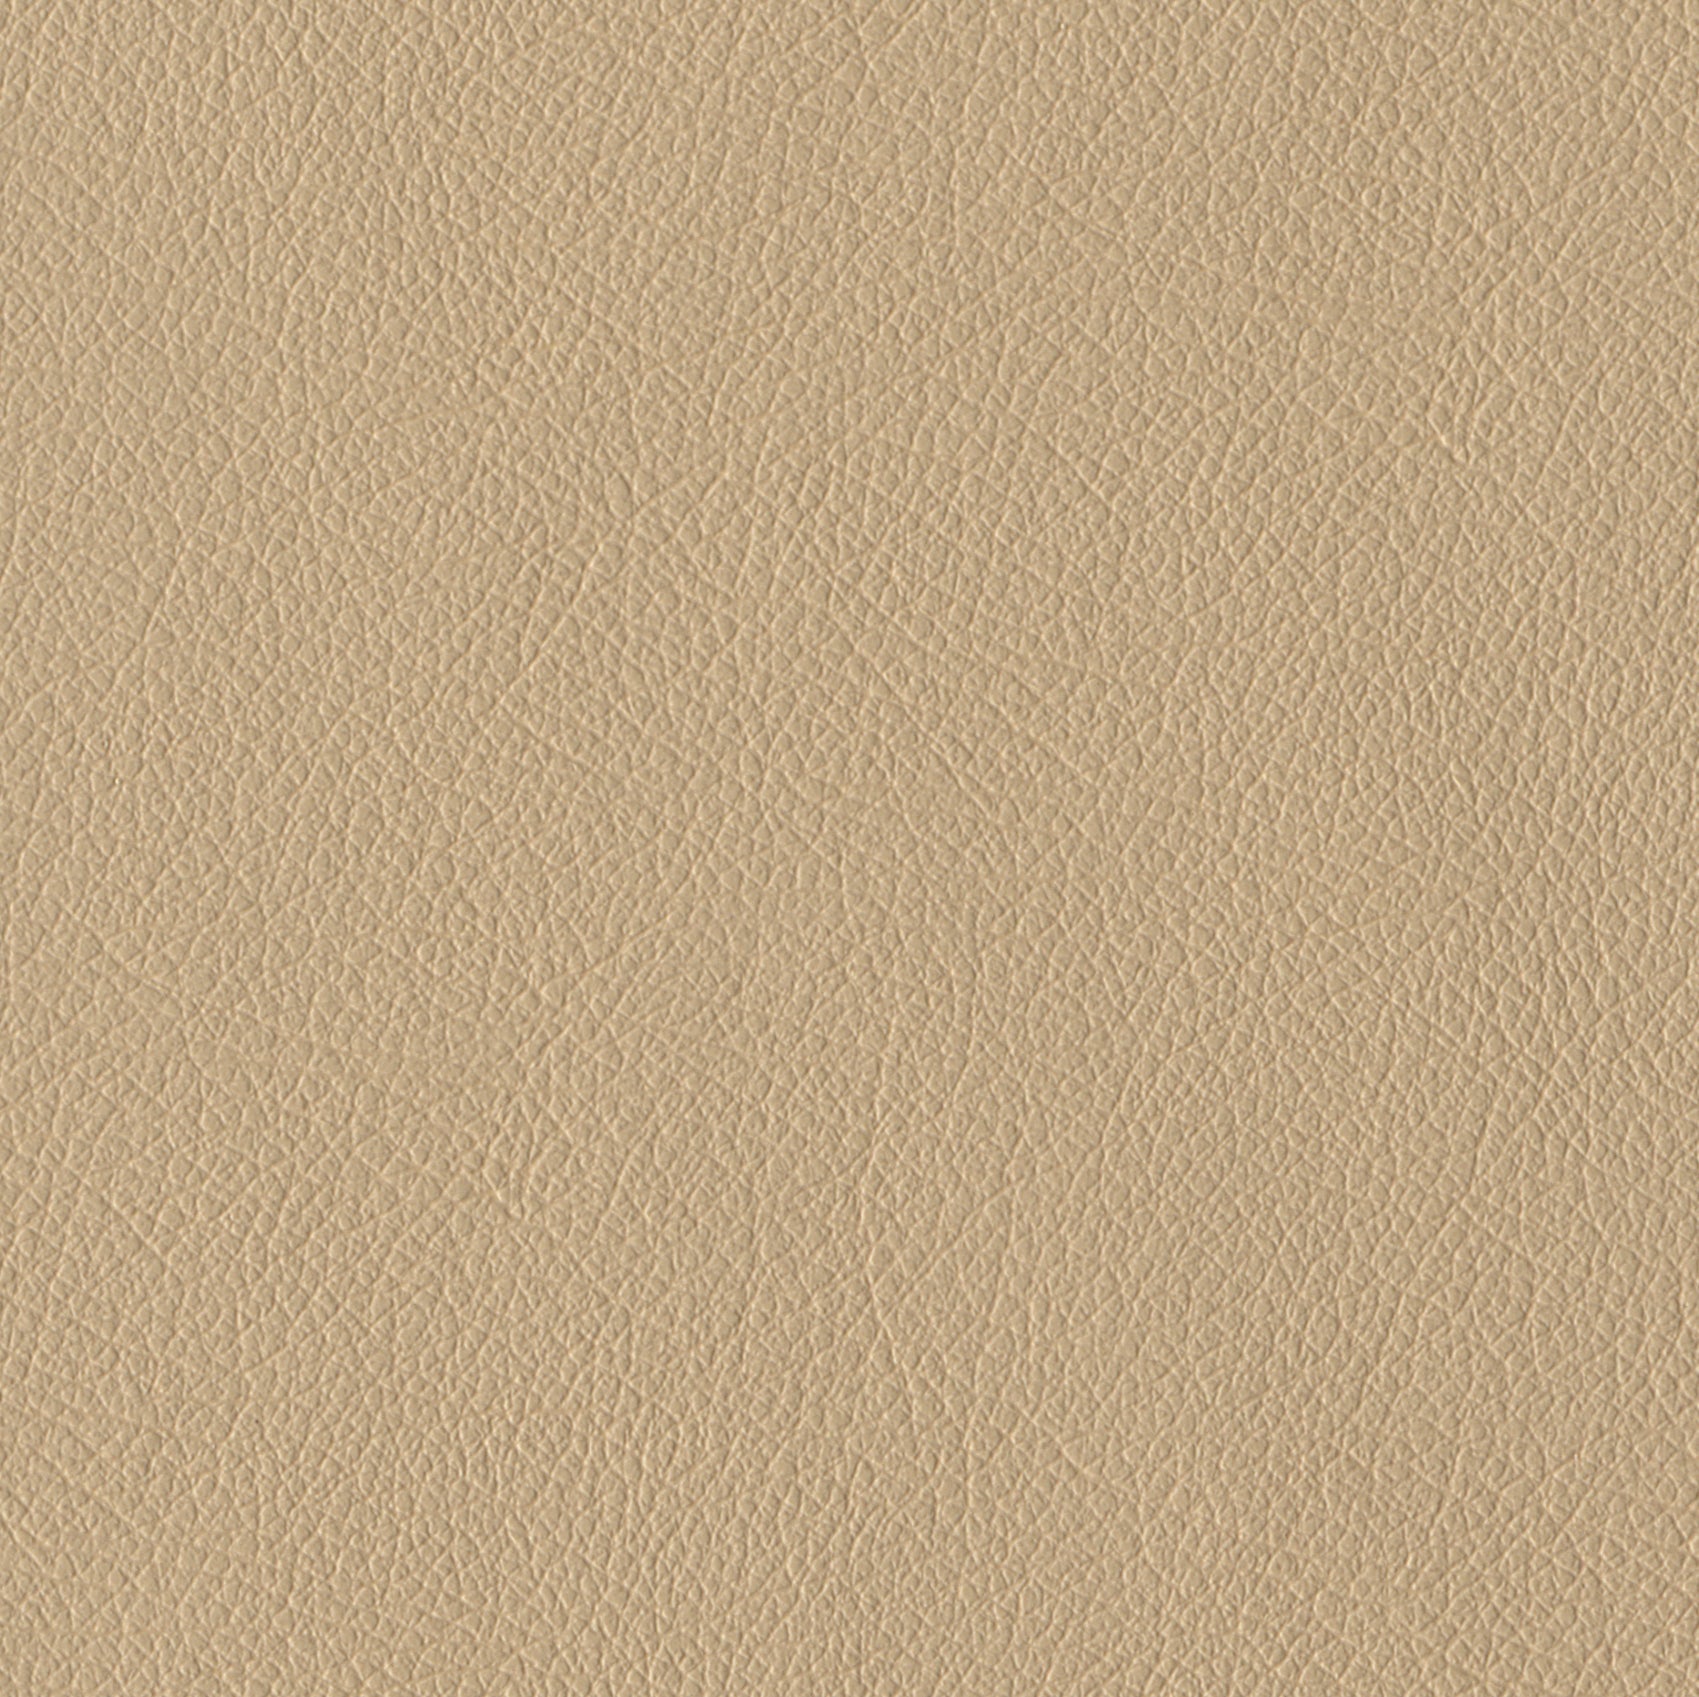    Andriali-Contract-Vinyl_Upholstery-Design-IconFR-Color-015PaleOakWood-Width-140cm